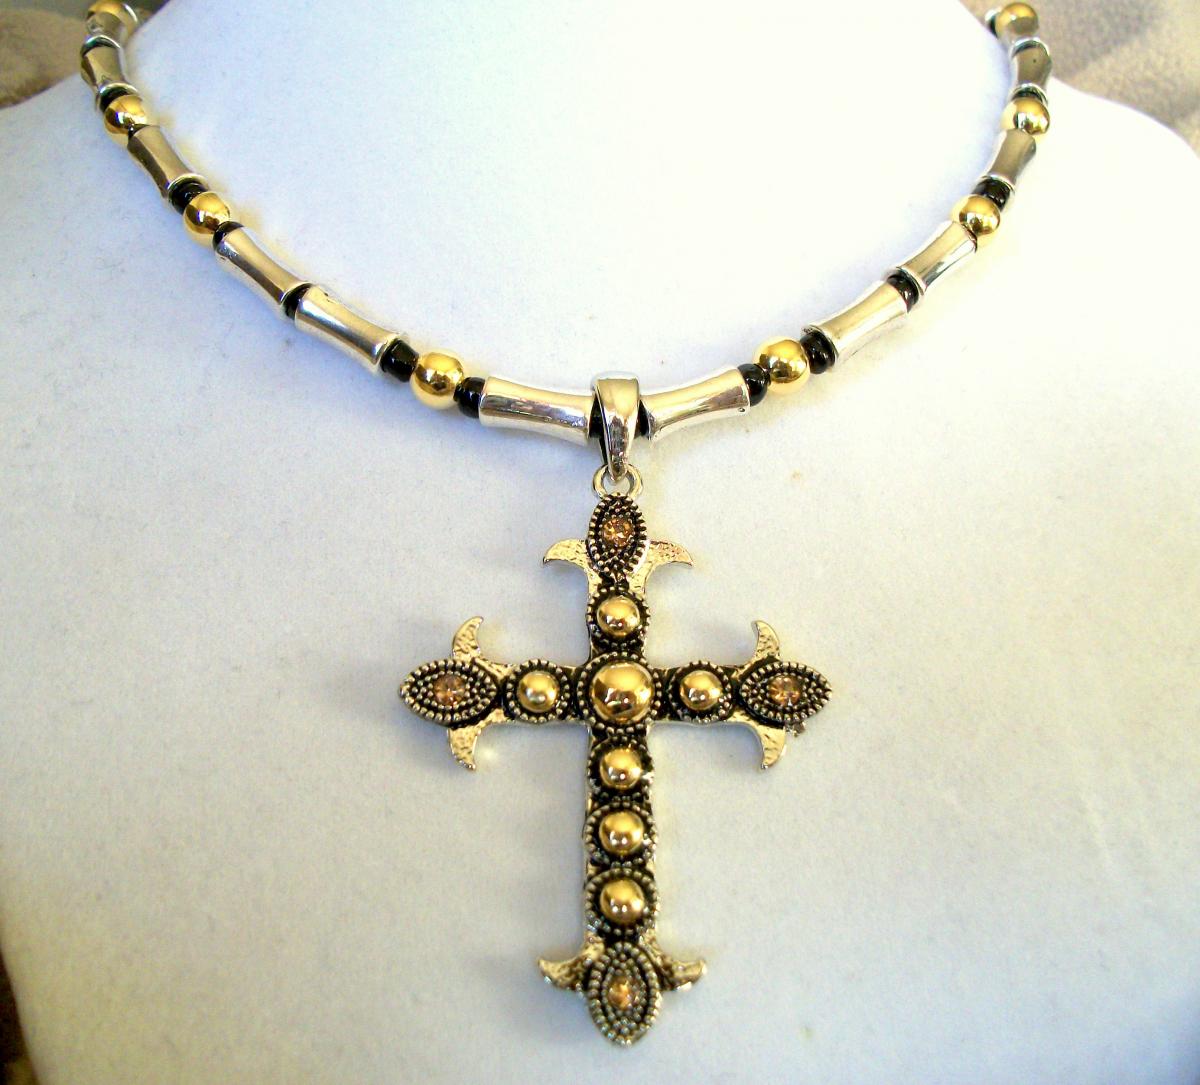 Handmade Silver And Gold Necklace With Black Accents, Beautiful Cross Pendant!